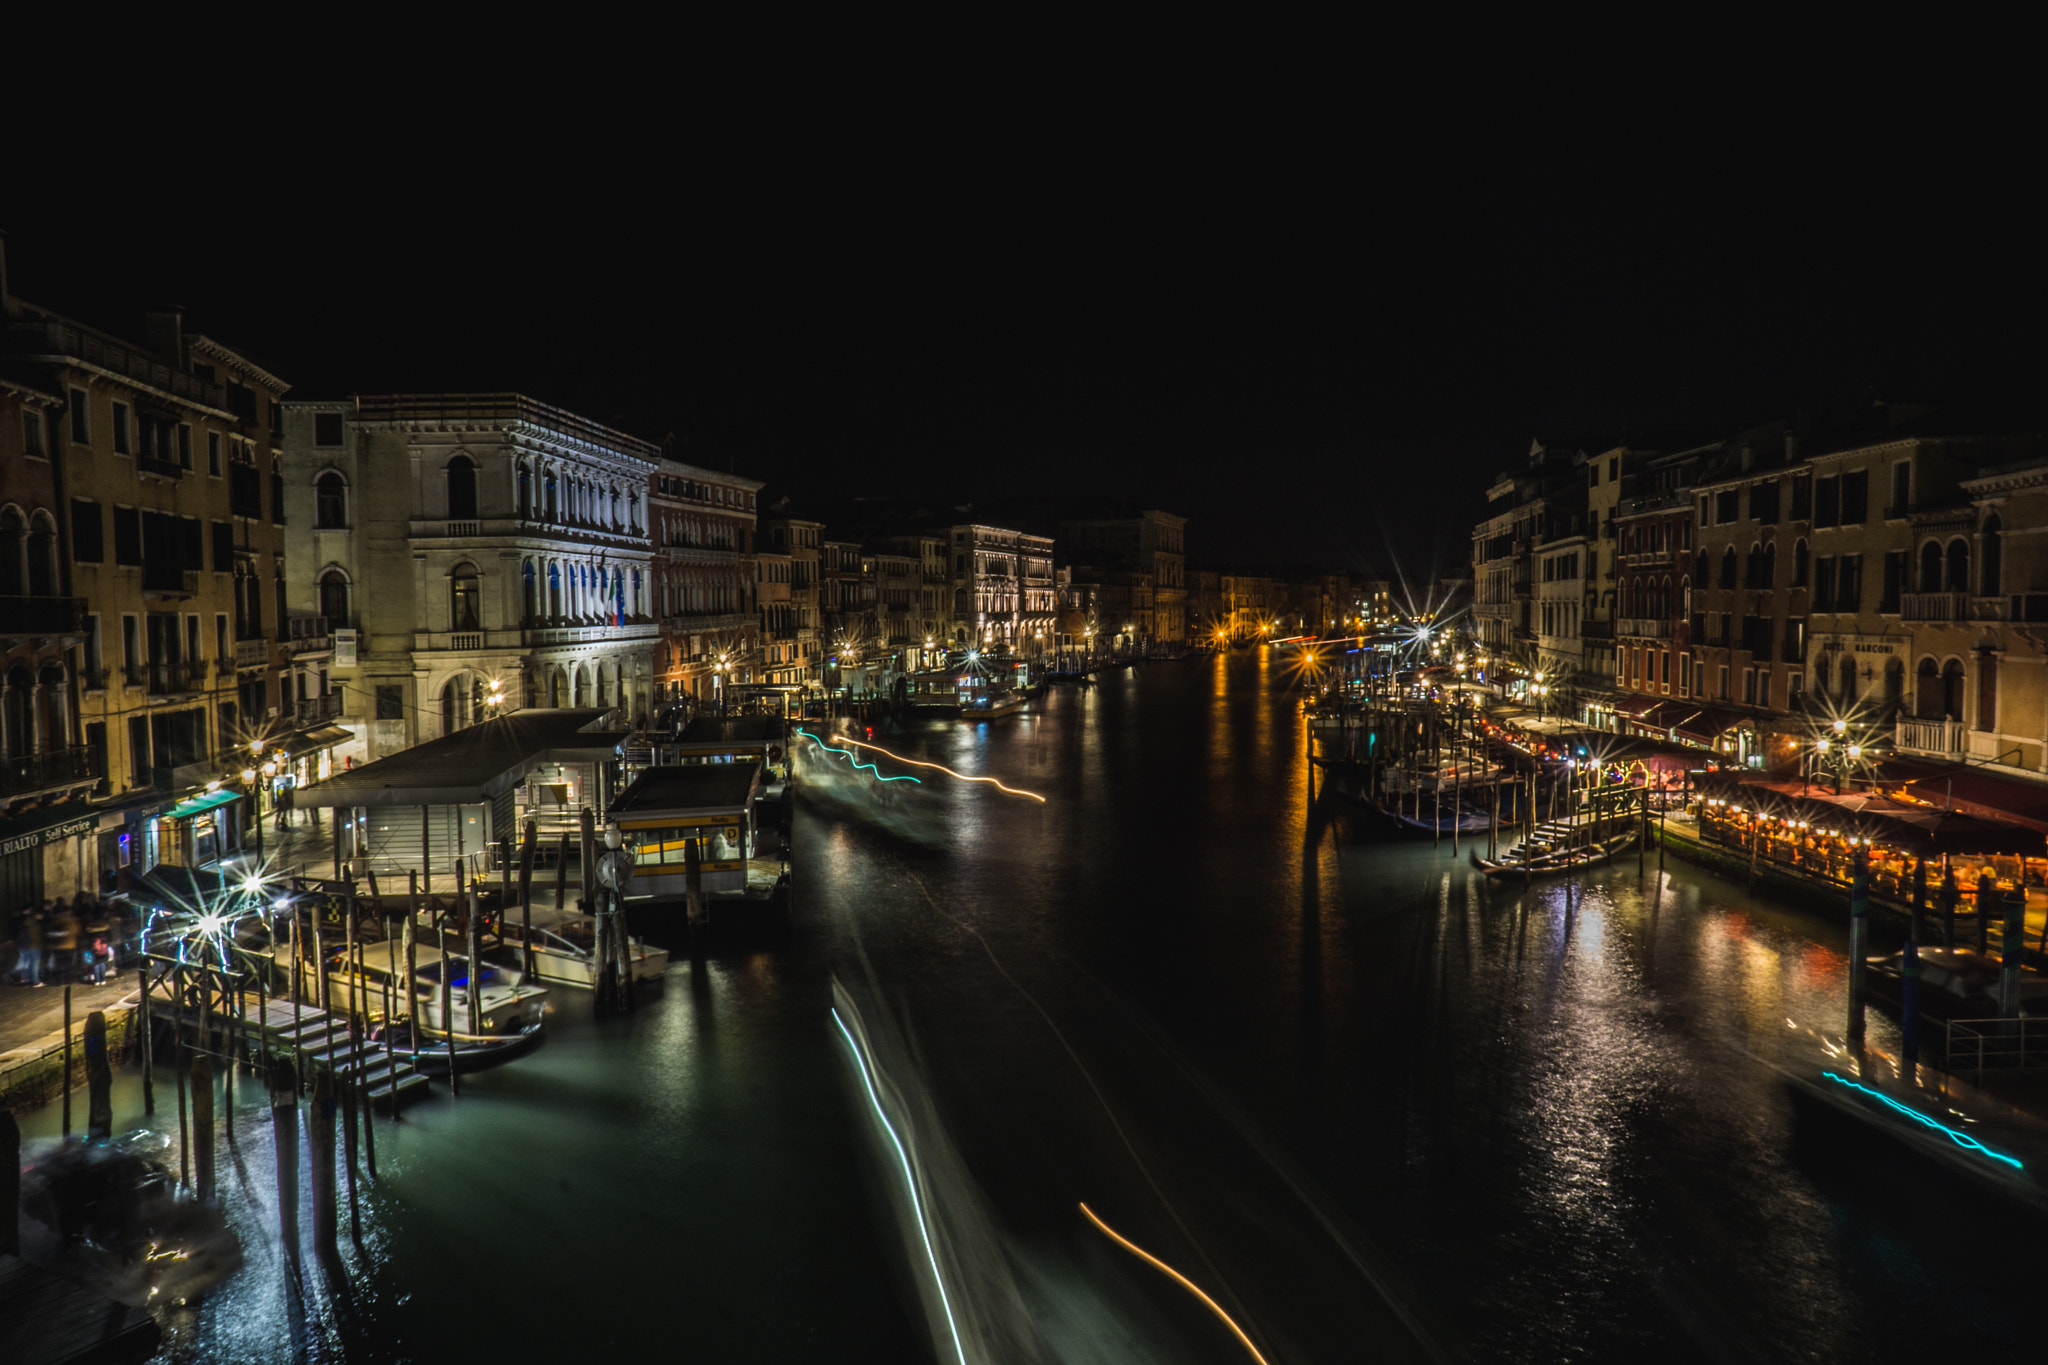 Sony a6000 sample photo. Grand canal at night photography